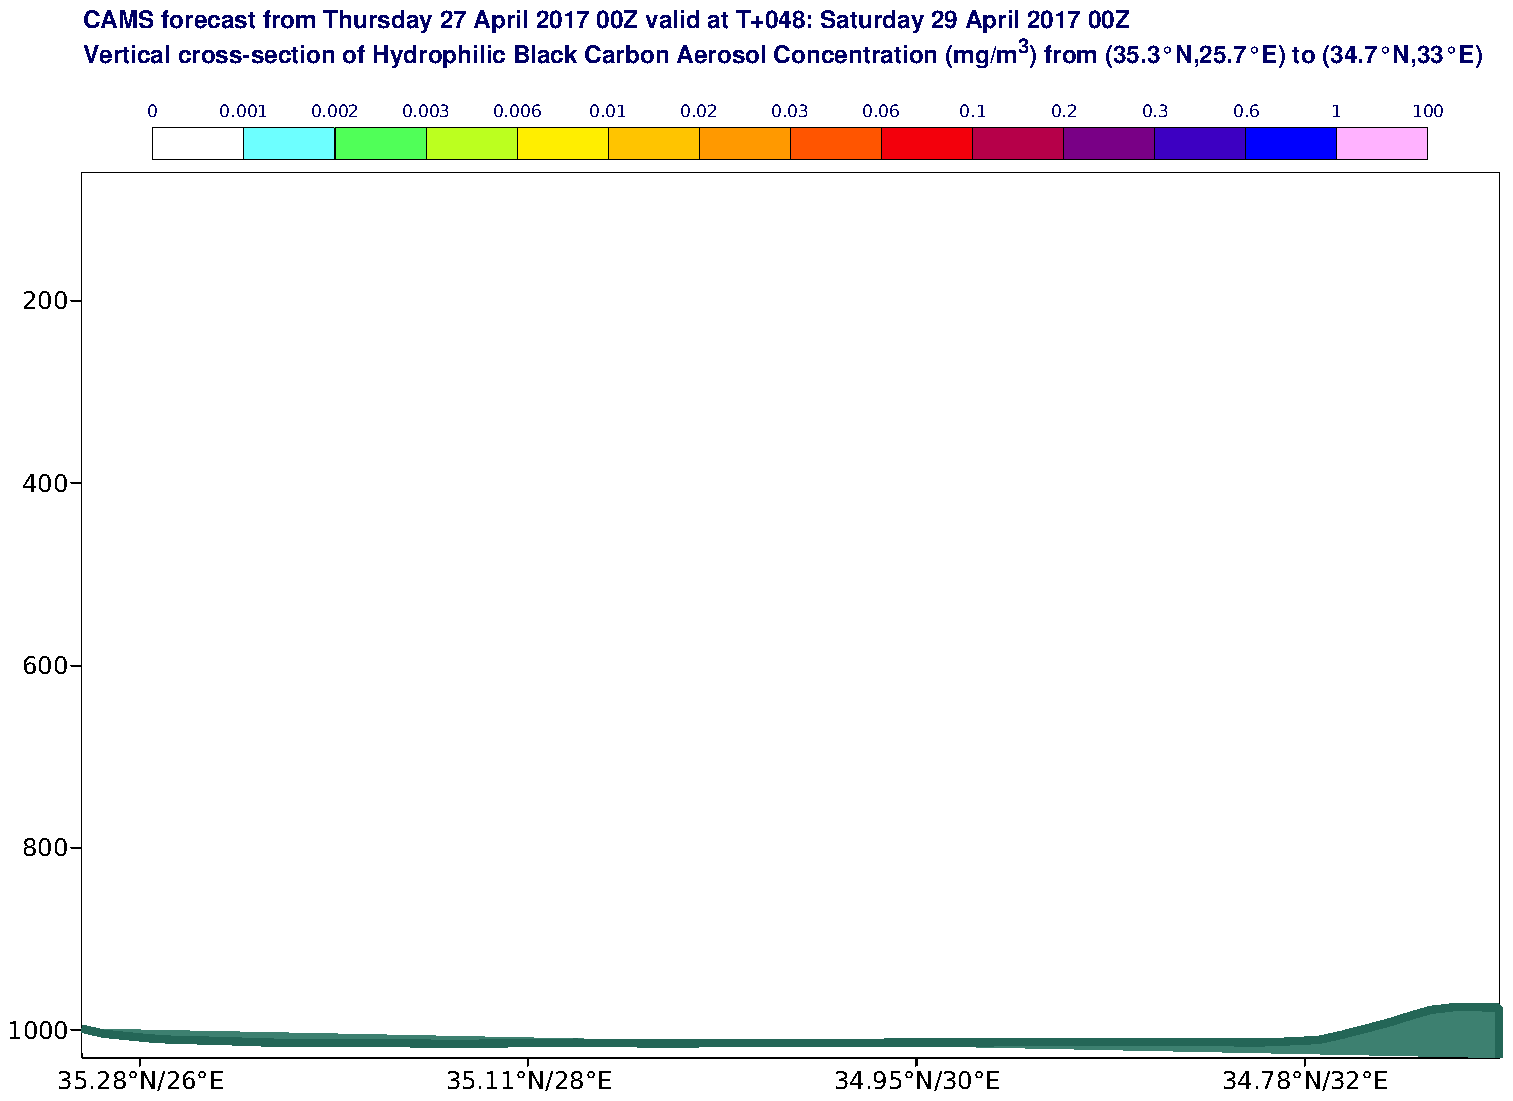 Vertical cross-section of Hydrophilic Black Carbon Aerosol Concentration (mg/m3) valid at T48 - 2017-04-29 00:00